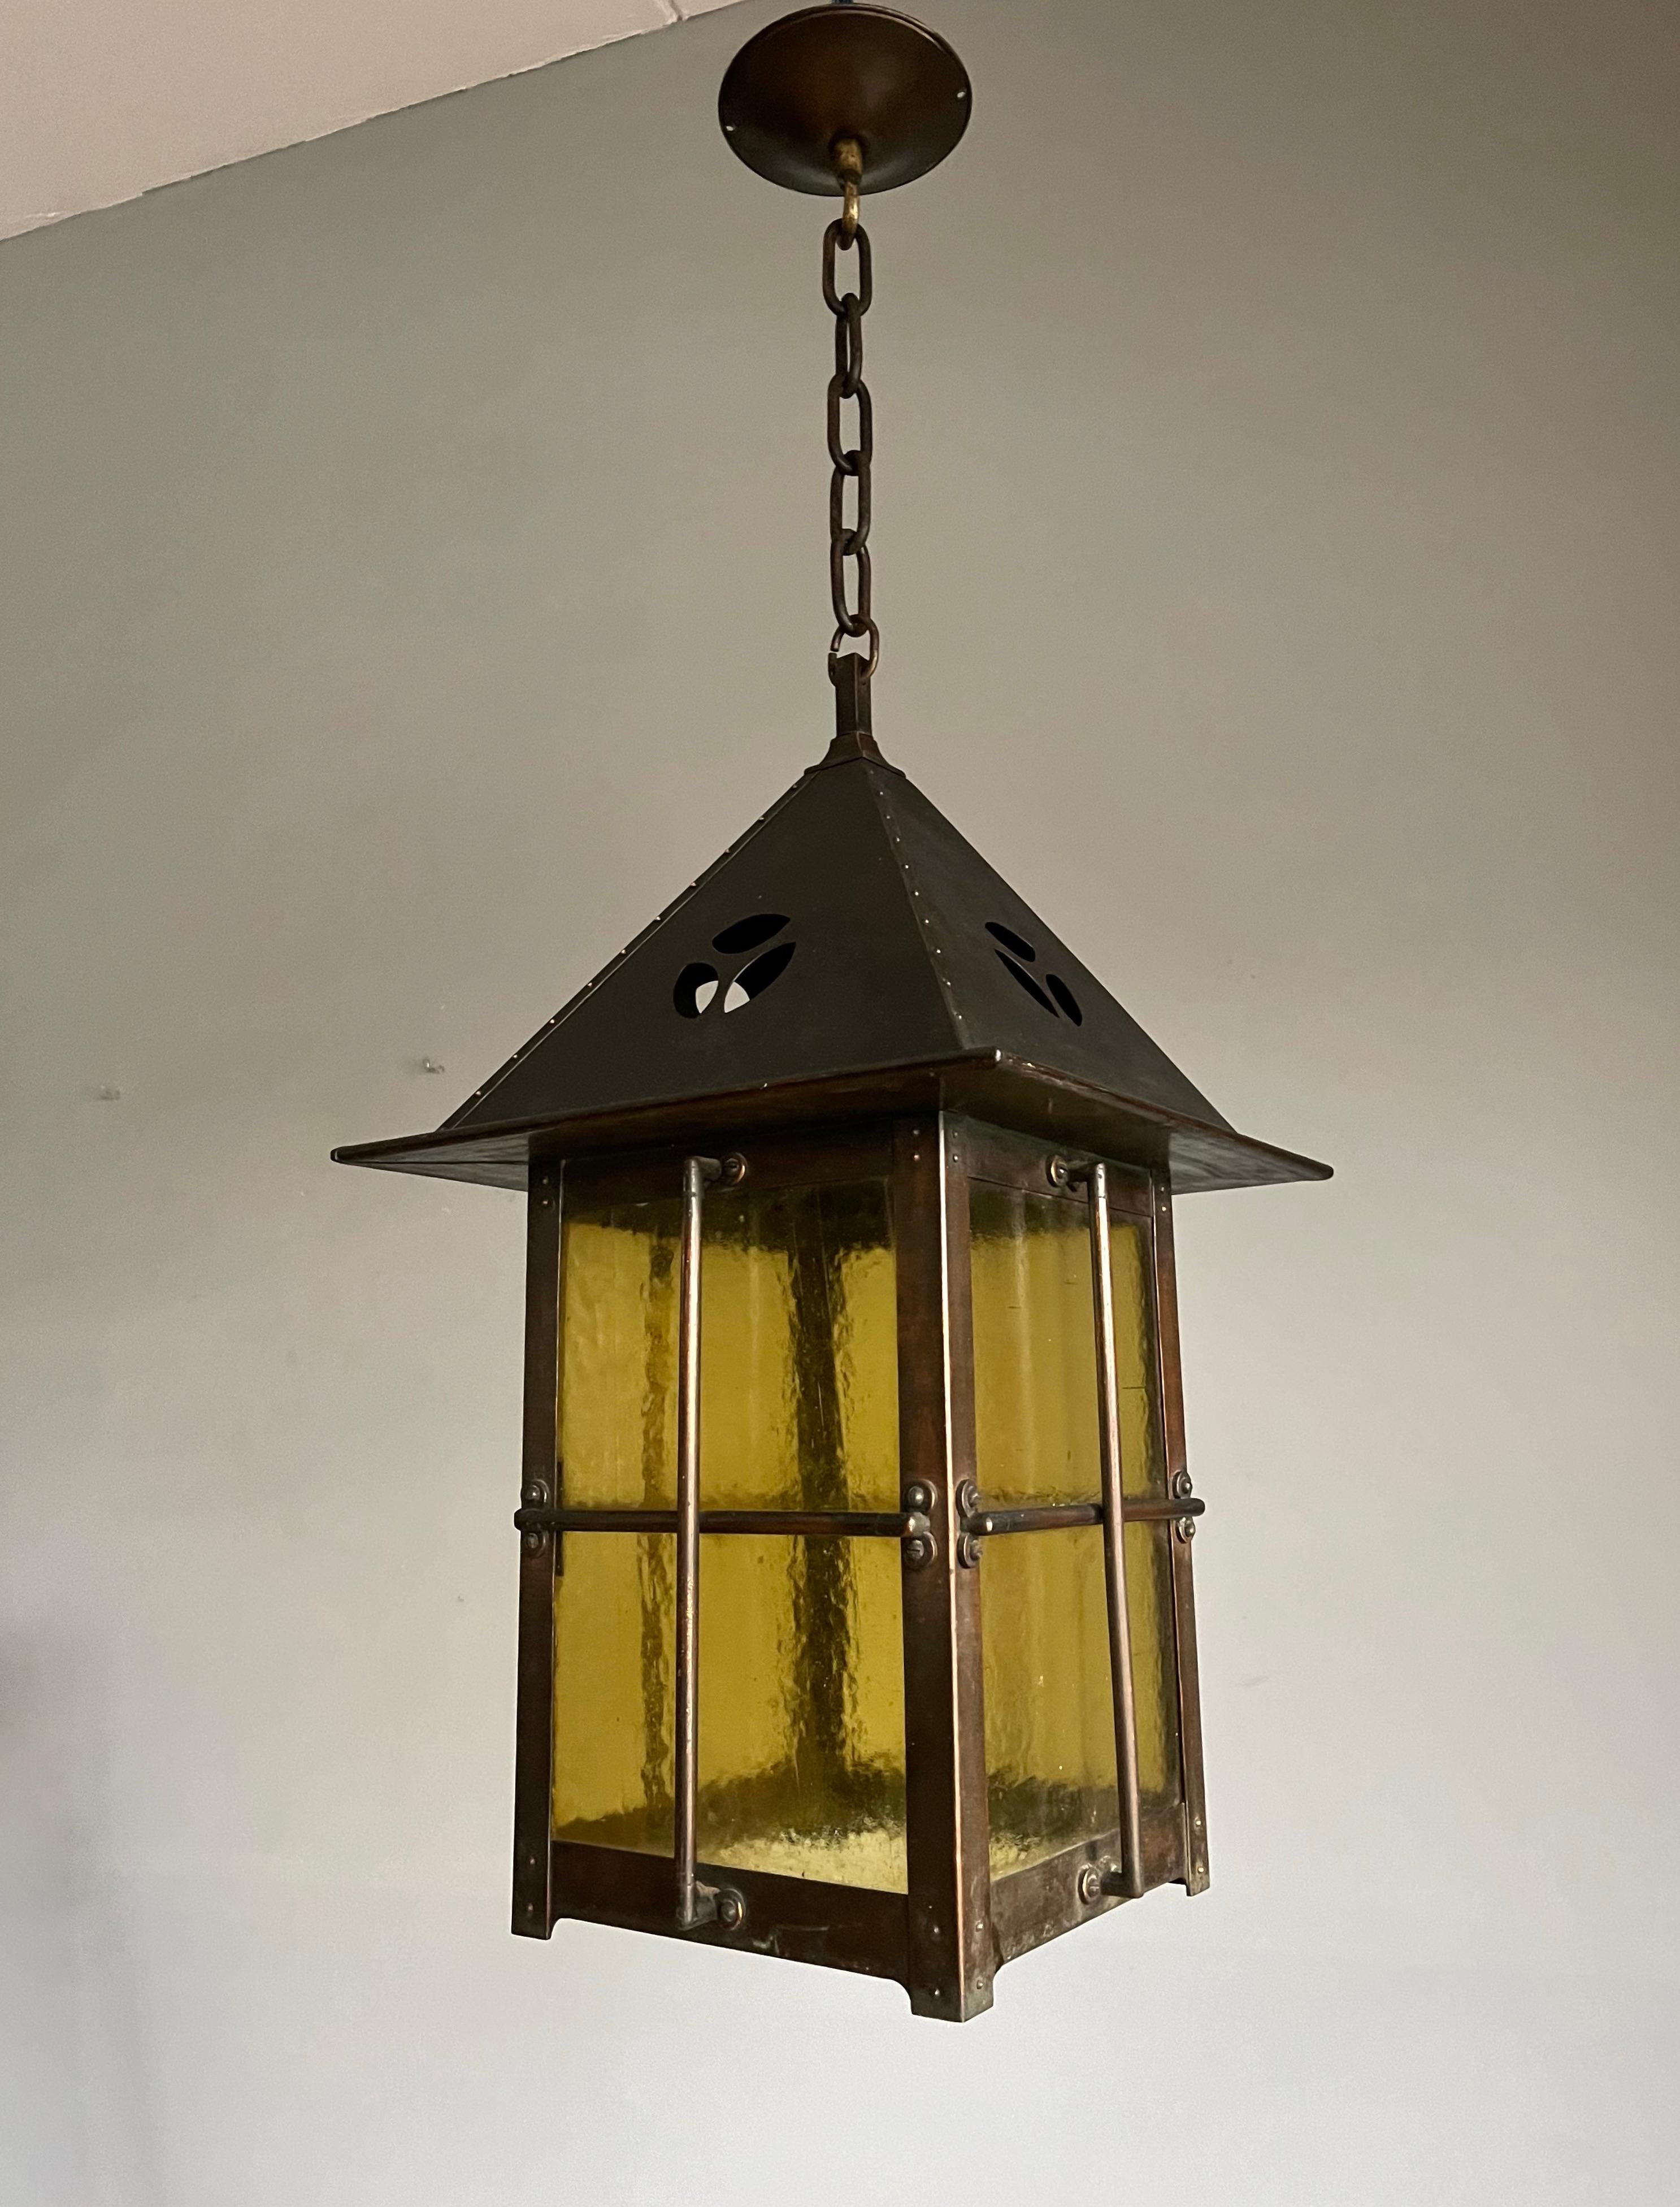 Impressive and finer quality craftsmanship light fixture. 

If you are a collector of truly original and all-handcrafted art and antiques then this large and one of a kind pendant could be flying your way soon. With antique light fixtures being